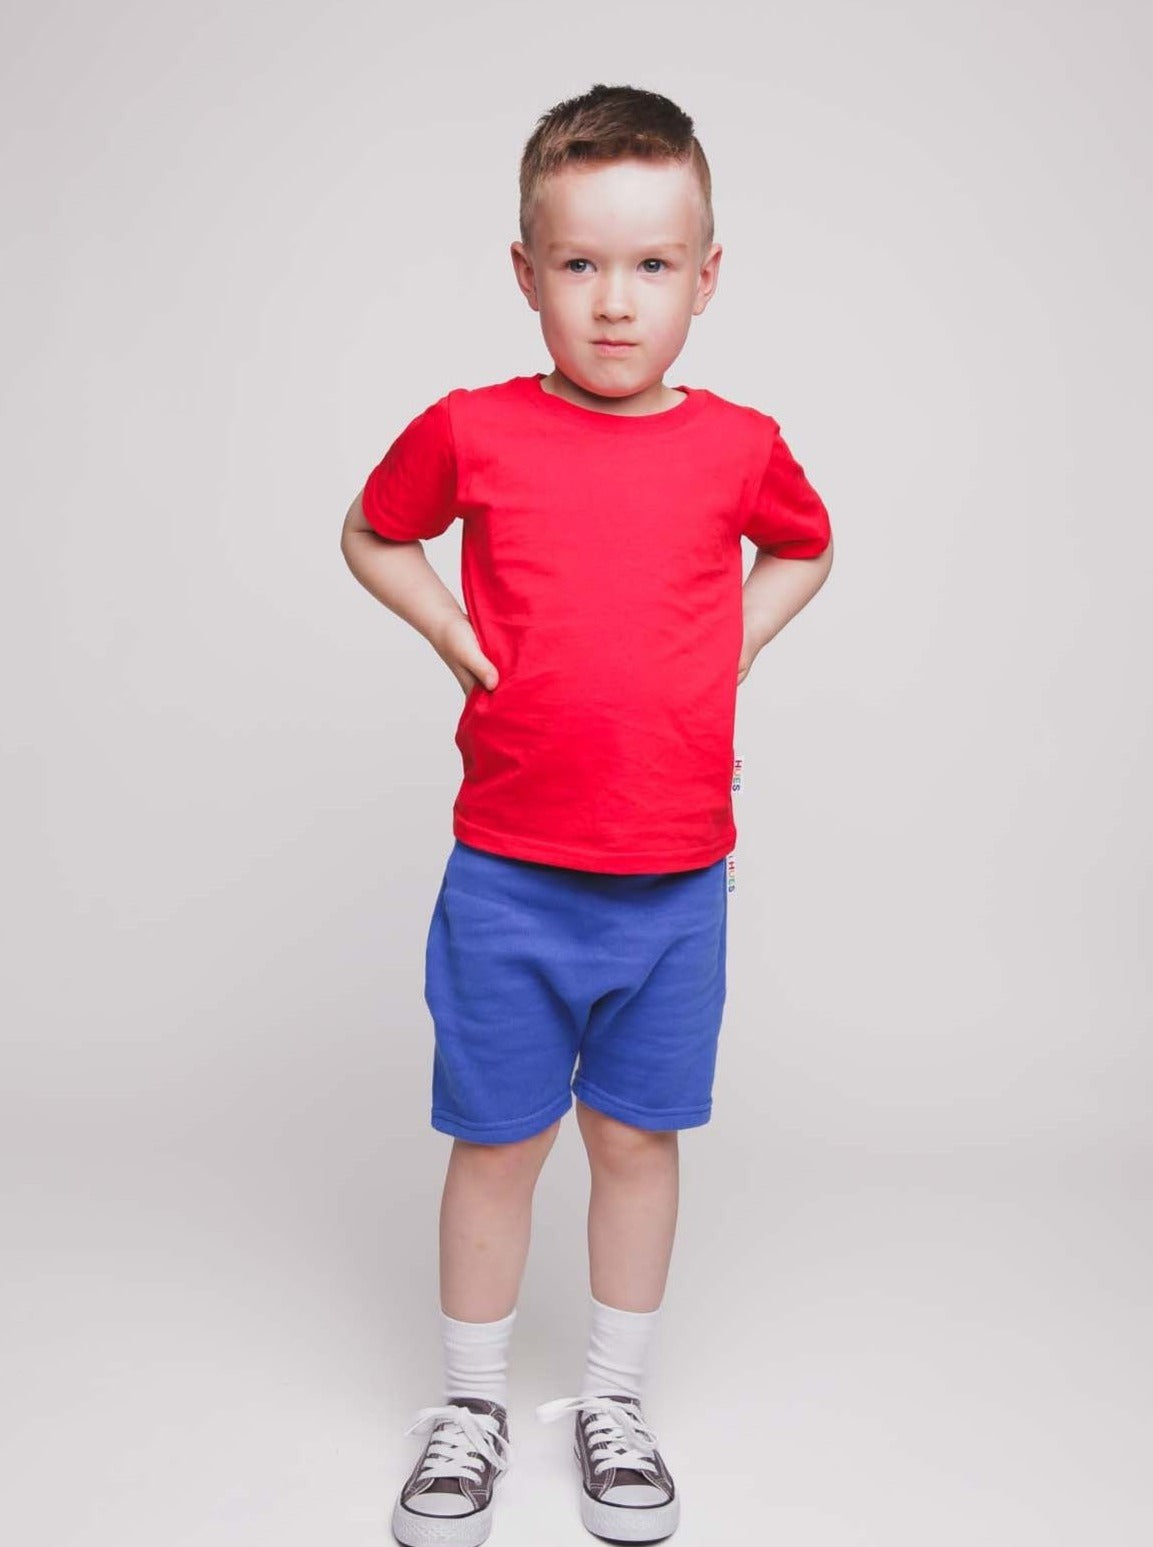 A boy with a short a haircut wearing a red t-shirt and blue shorts - Hues Clothing